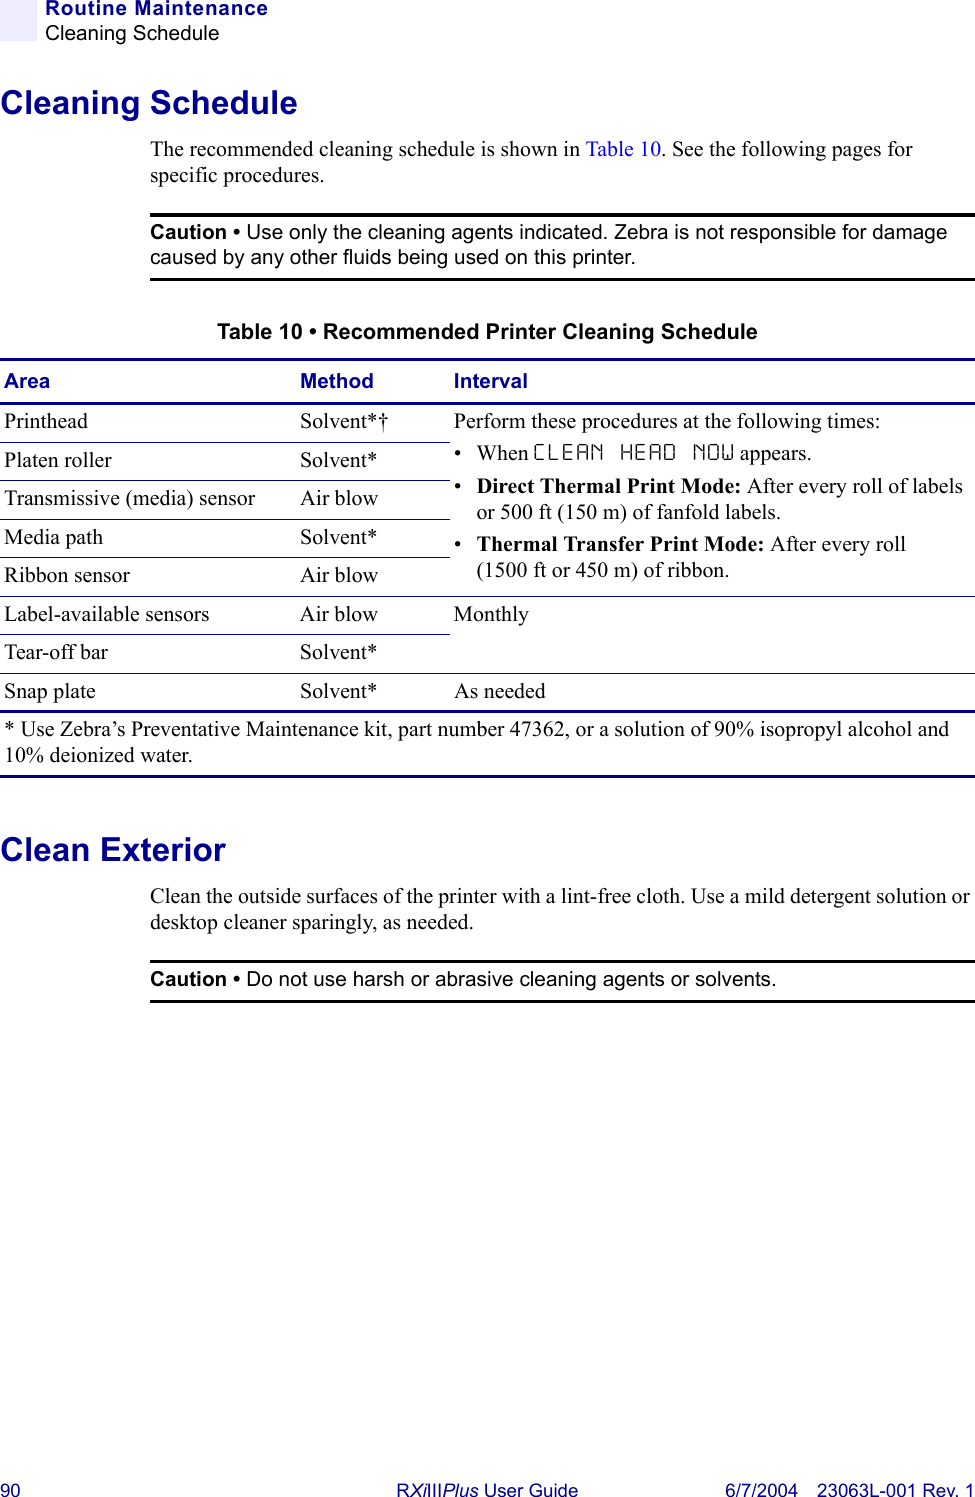 90 RXiIIIPlus User Guide 6/7/2004 23063L-001 Rev. 1Routine MaintenanceCleaning ScheduleCleaning ScheduleThe recommended cleaning schedule is shown in Table 10. See the following pages for specific procedures.Clean ExteriorClean the outside surfaces of the printer with a lint-free cloth. Use a mild detergent solution or desktop cleaner sparingly, as needed.Caution • Use only the cleaning agents indicated. Zebra is not responsible for damage caused by any other fluids being used on this printer.Table 10 • Recommended Printer Cleaning ScheduleArea Method IntervalPrinthead Solvent*† Perform these procedures at the following times:•When CLEAN HEAD NOWappears.•Direct Thermal Print Mode: After every roll of labels or 500 ft (150 m) of fanfold labels.•Thermal Transfer Print Mode: After every roll (1500 ft or 450 m) of ribbon.Platen roller Solvent*Transmissive (media) sensor Air blowMedia path Solvent*Ribbon sensor Air blowLabel-available sensors Air blow MonthlyTear-off bar Solvent*Snap plate Solvent* As needed* Use Zebra’s Preventative Maintenance kit, part number 47362, or a solution of 90% isopropyl alcohol and 10% deionized water. Caution • Do not use harsh or abrasive cleaning agents or solvents.